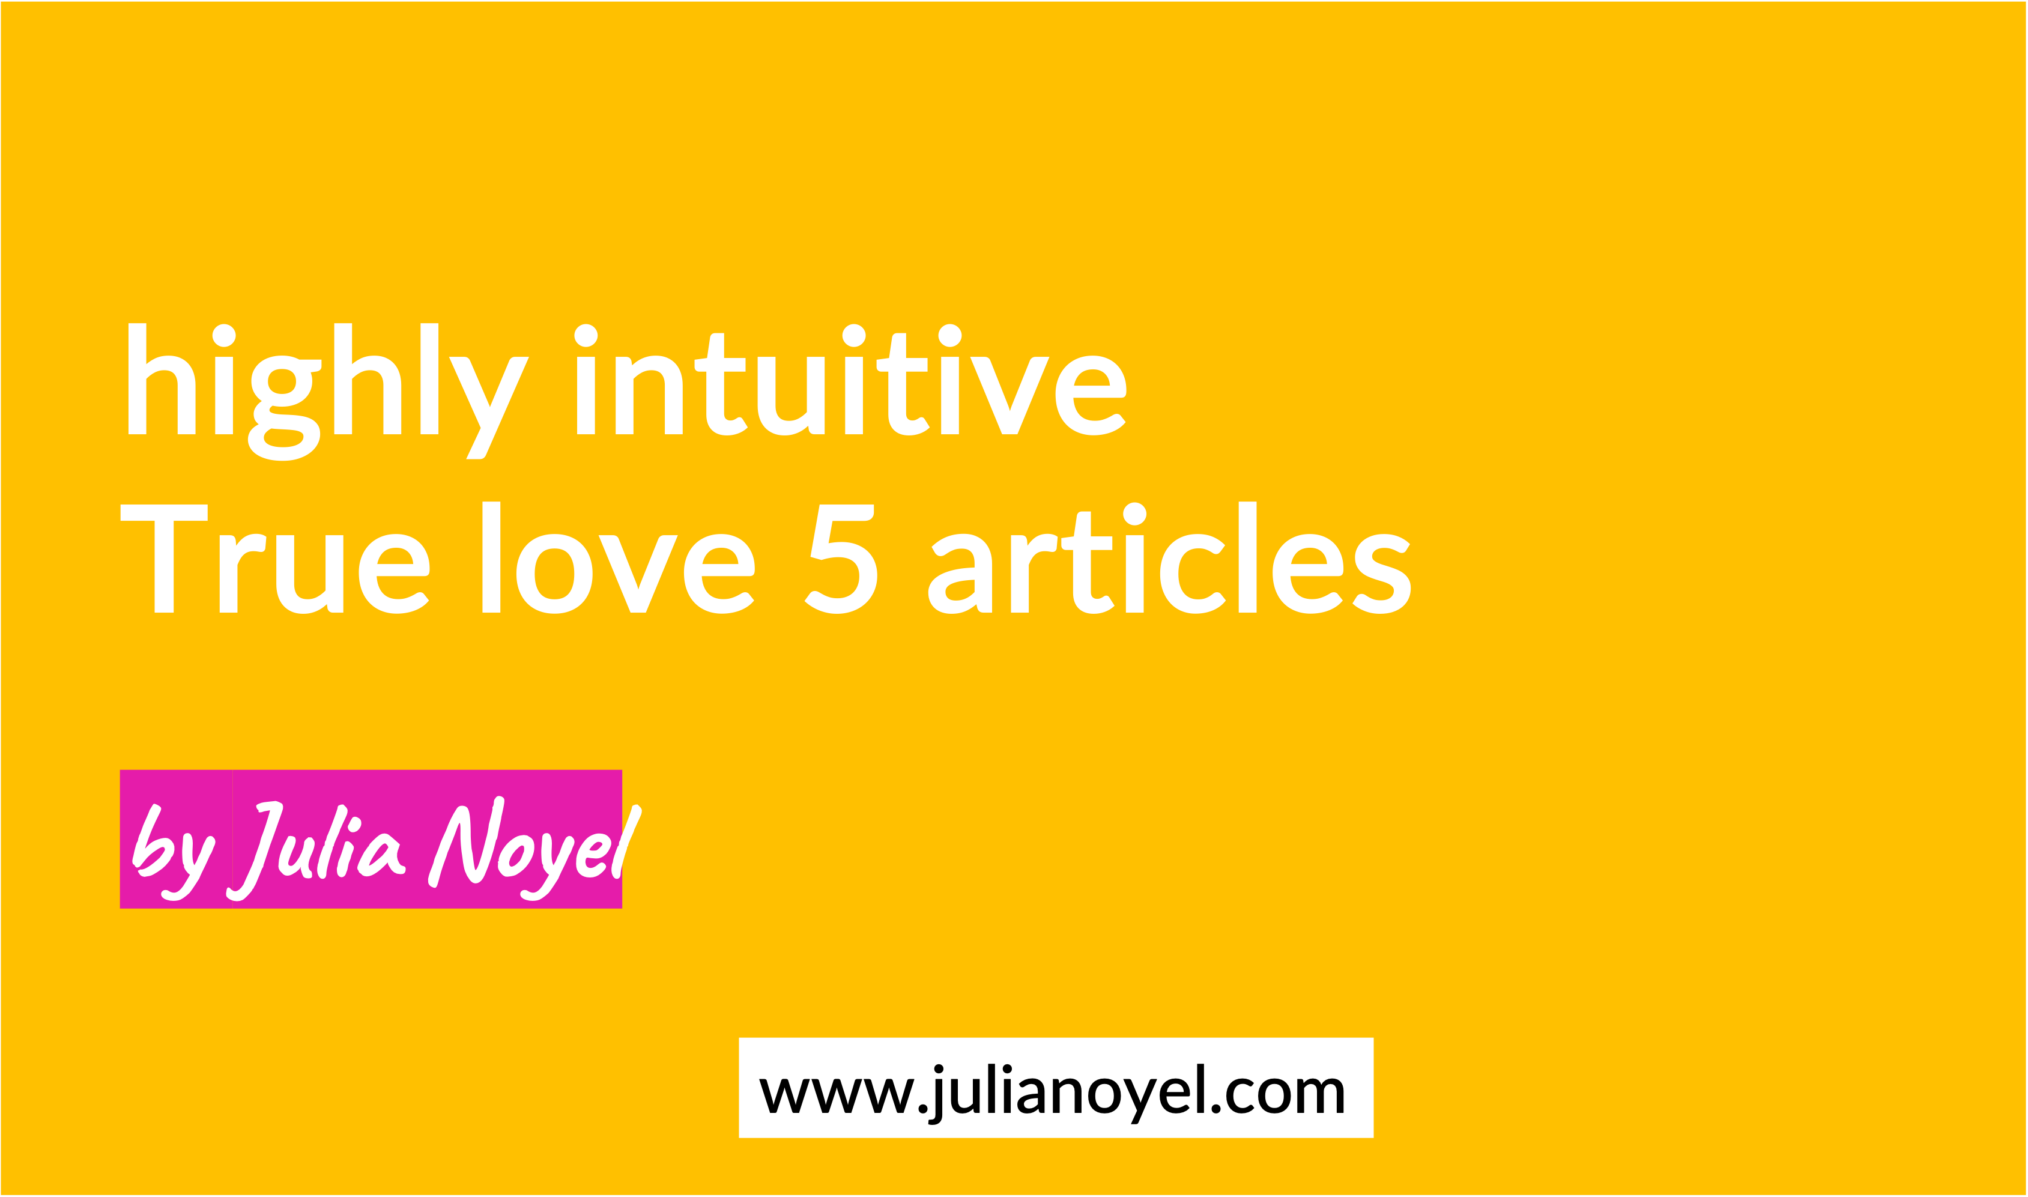 highly intuitive True love 5 articles by Julia Noyel